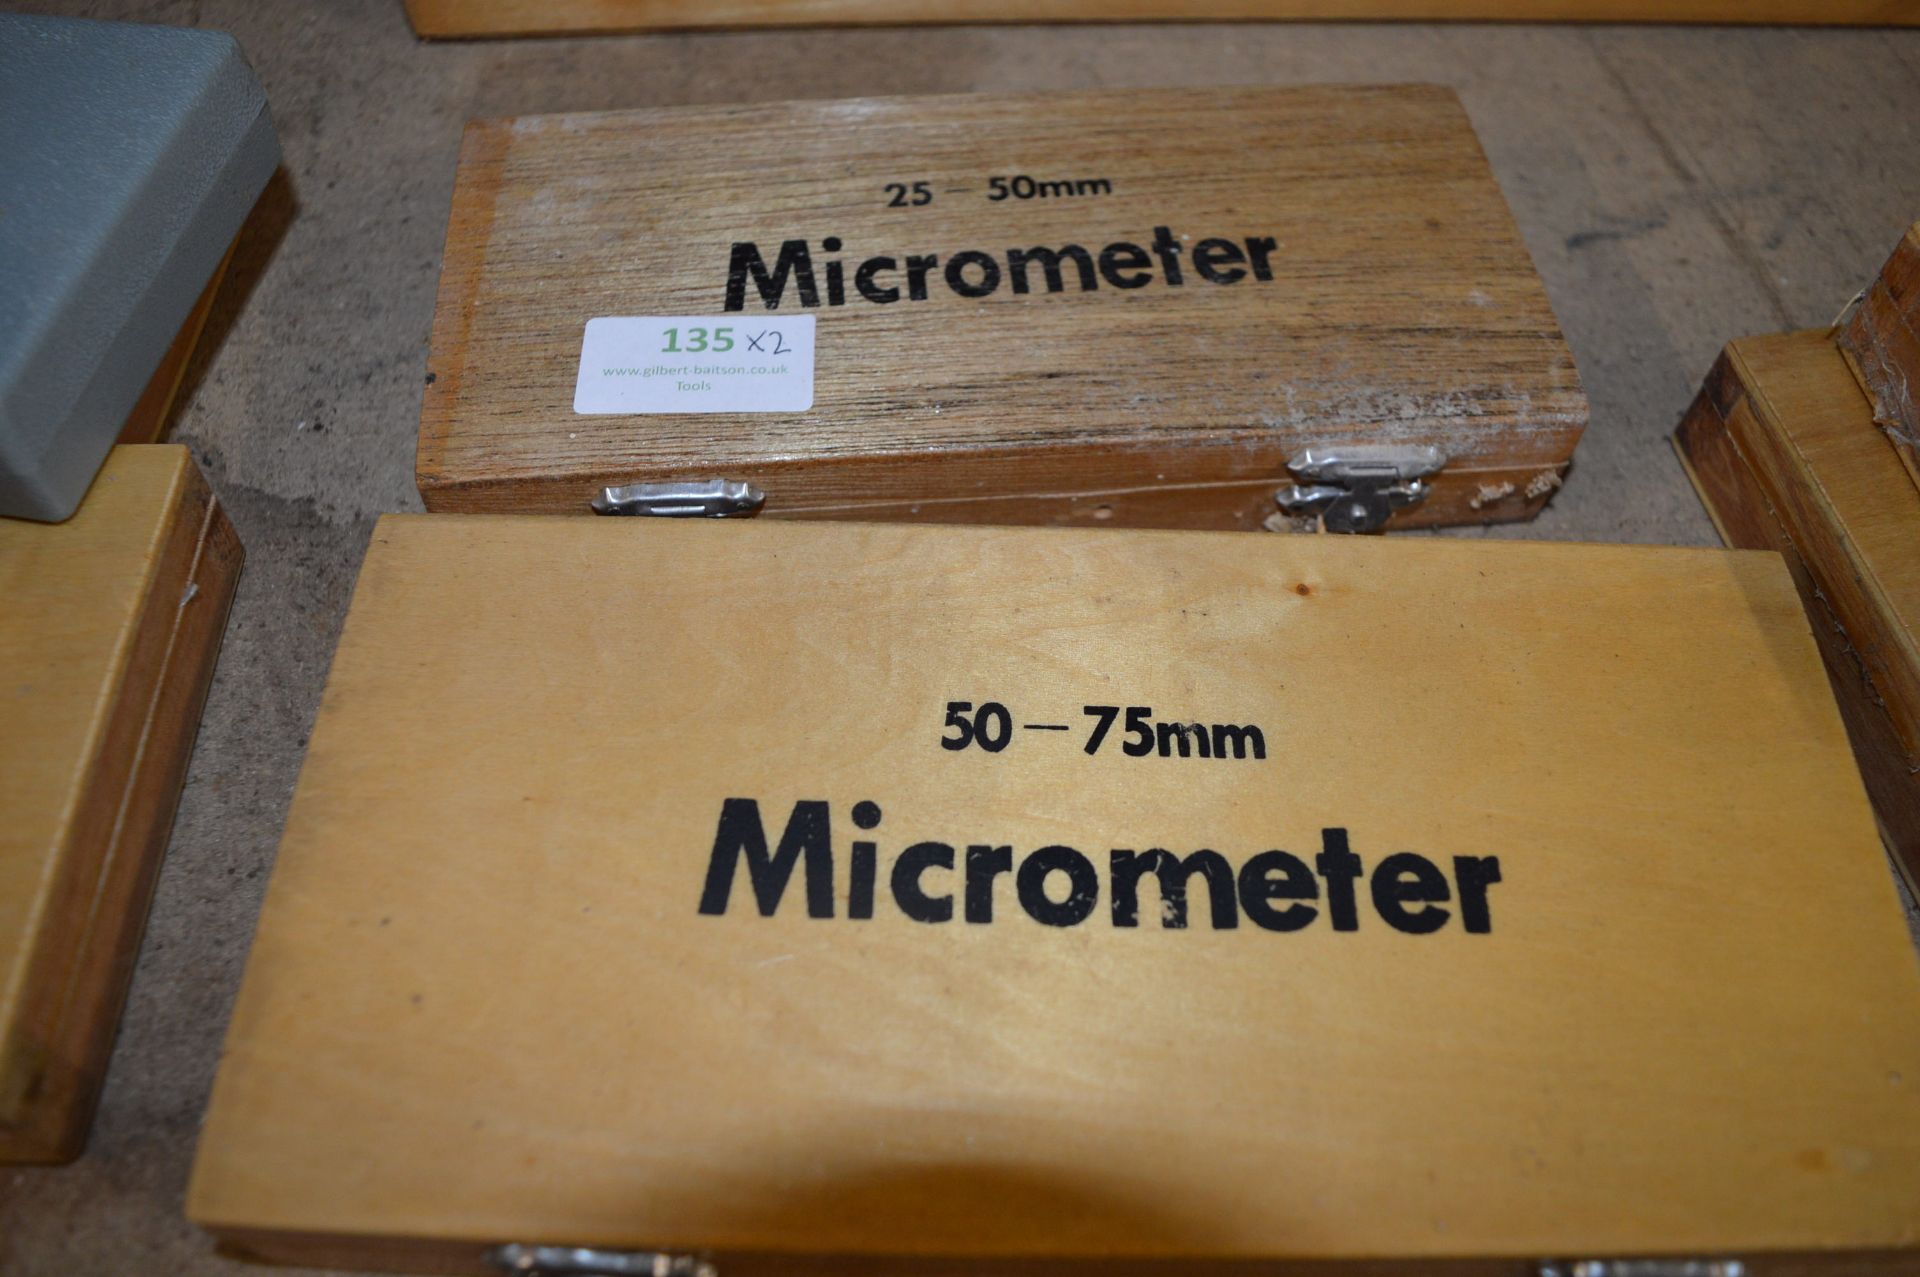 25-50mm and a 50-75mm Micrometer - Image 2 of 2